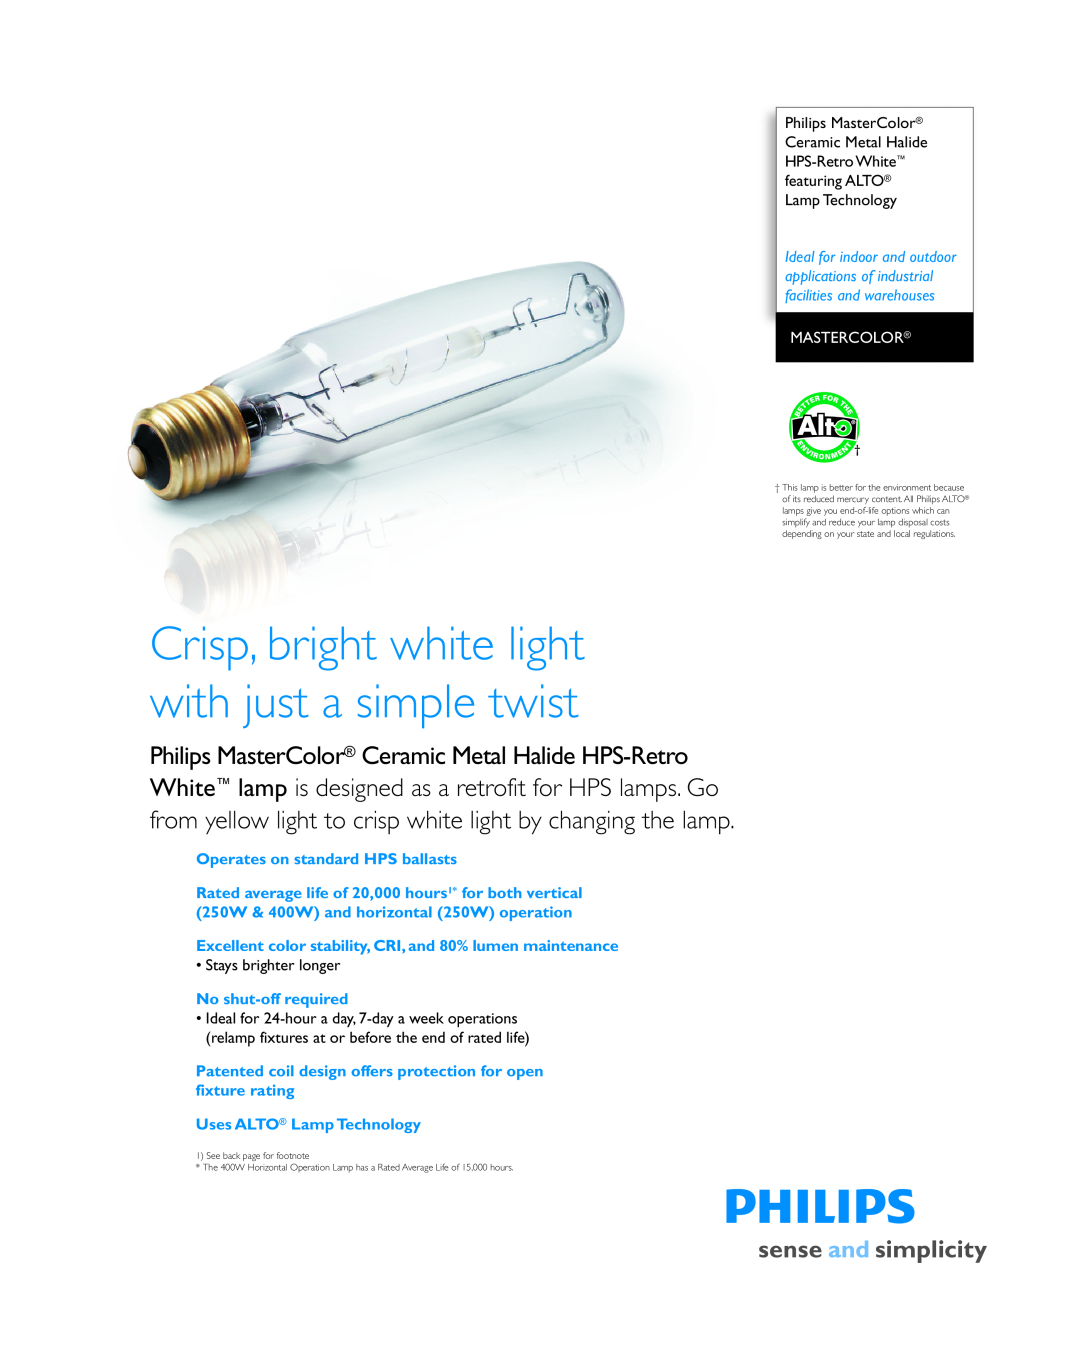 Philips P-5497-F manual Mastercolor, Crisp, bright white light with just a simple twist, Operates on standard HPS ballasts 